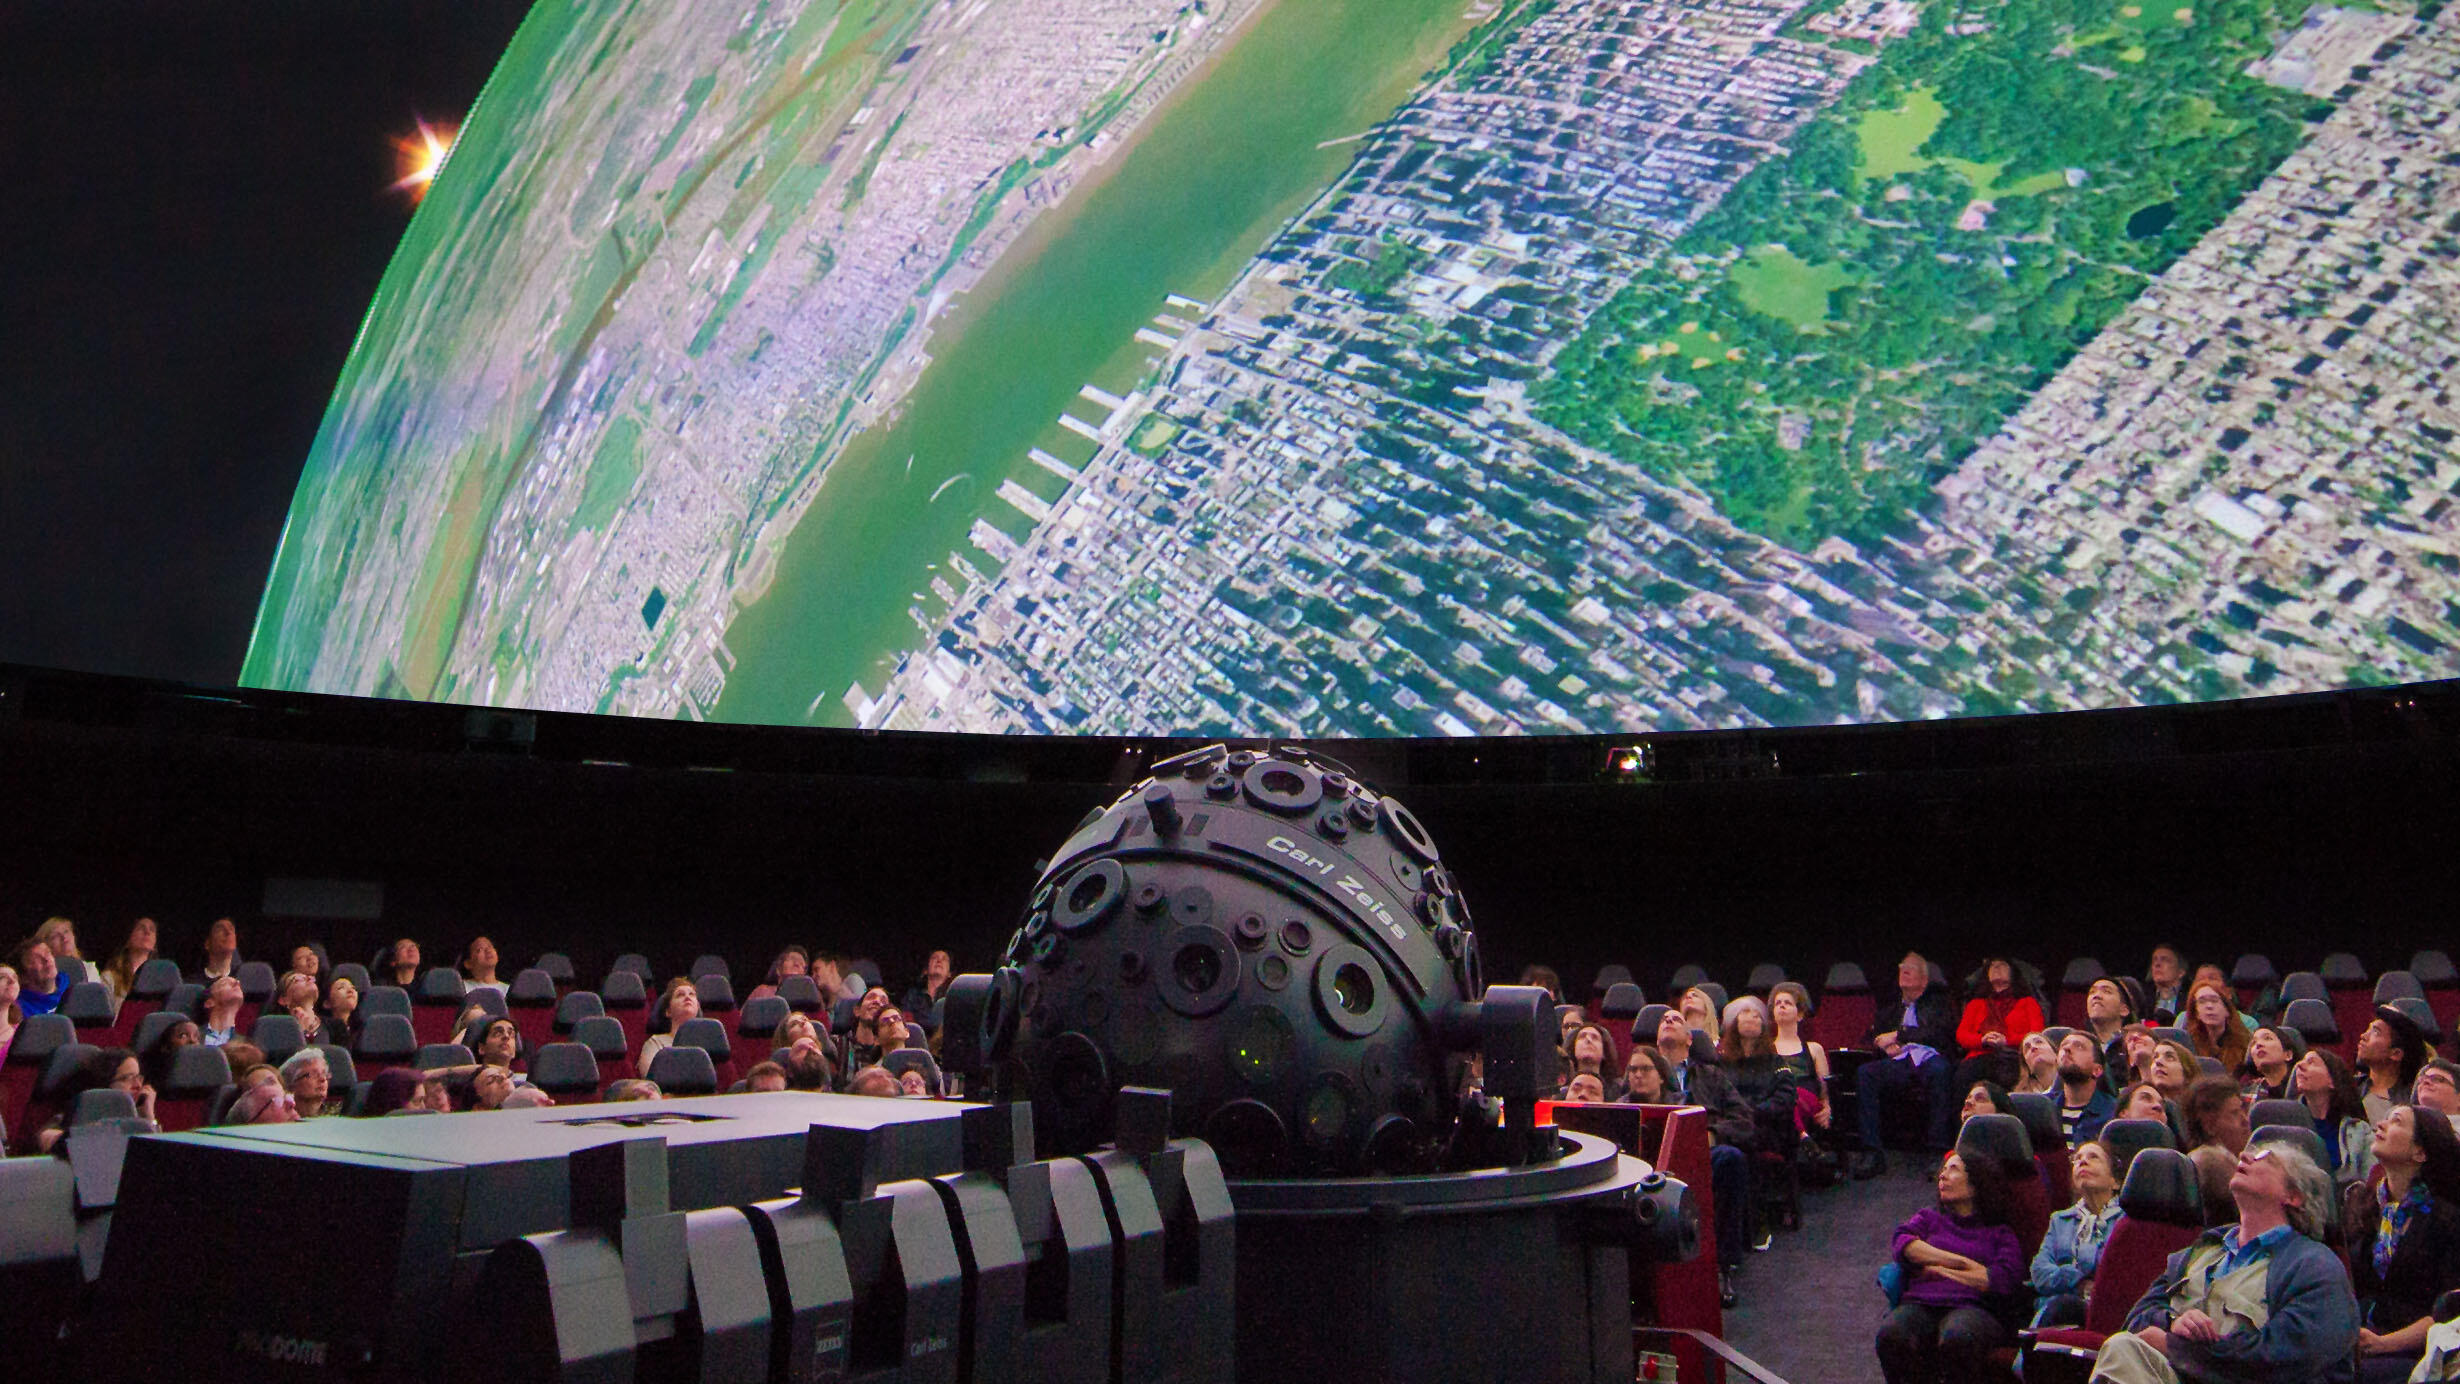 Visitors seated in chairs surrounding the Zeiss projector view images from space on the giant screen inside the Hayden Planetarium.